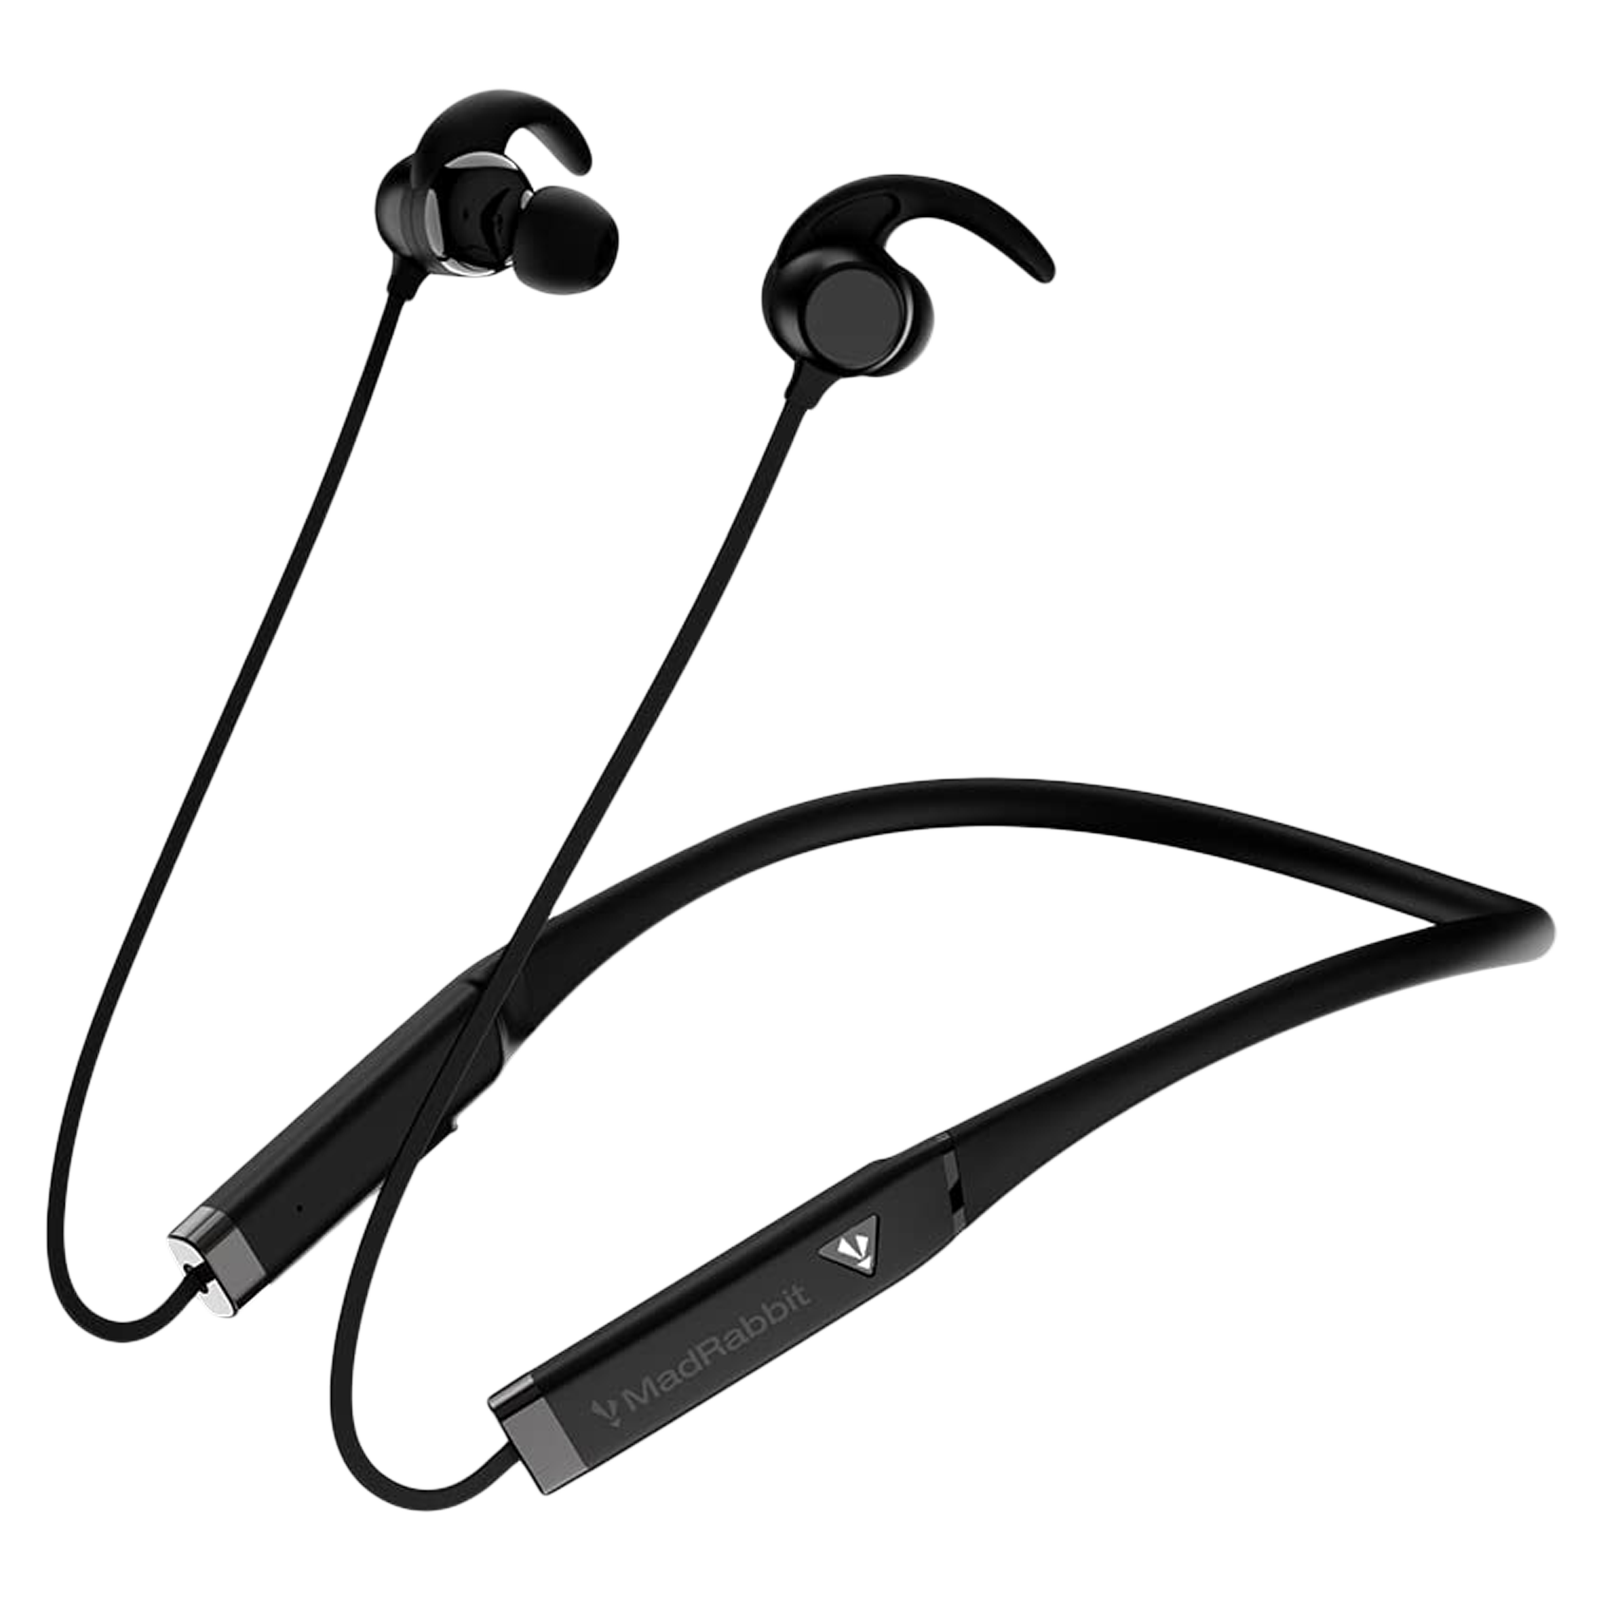 MadRabbit Bass On Pro Neckband with Environmental Noise Cancellation (IPX5 Water Resistant, Fast Charging, Black)